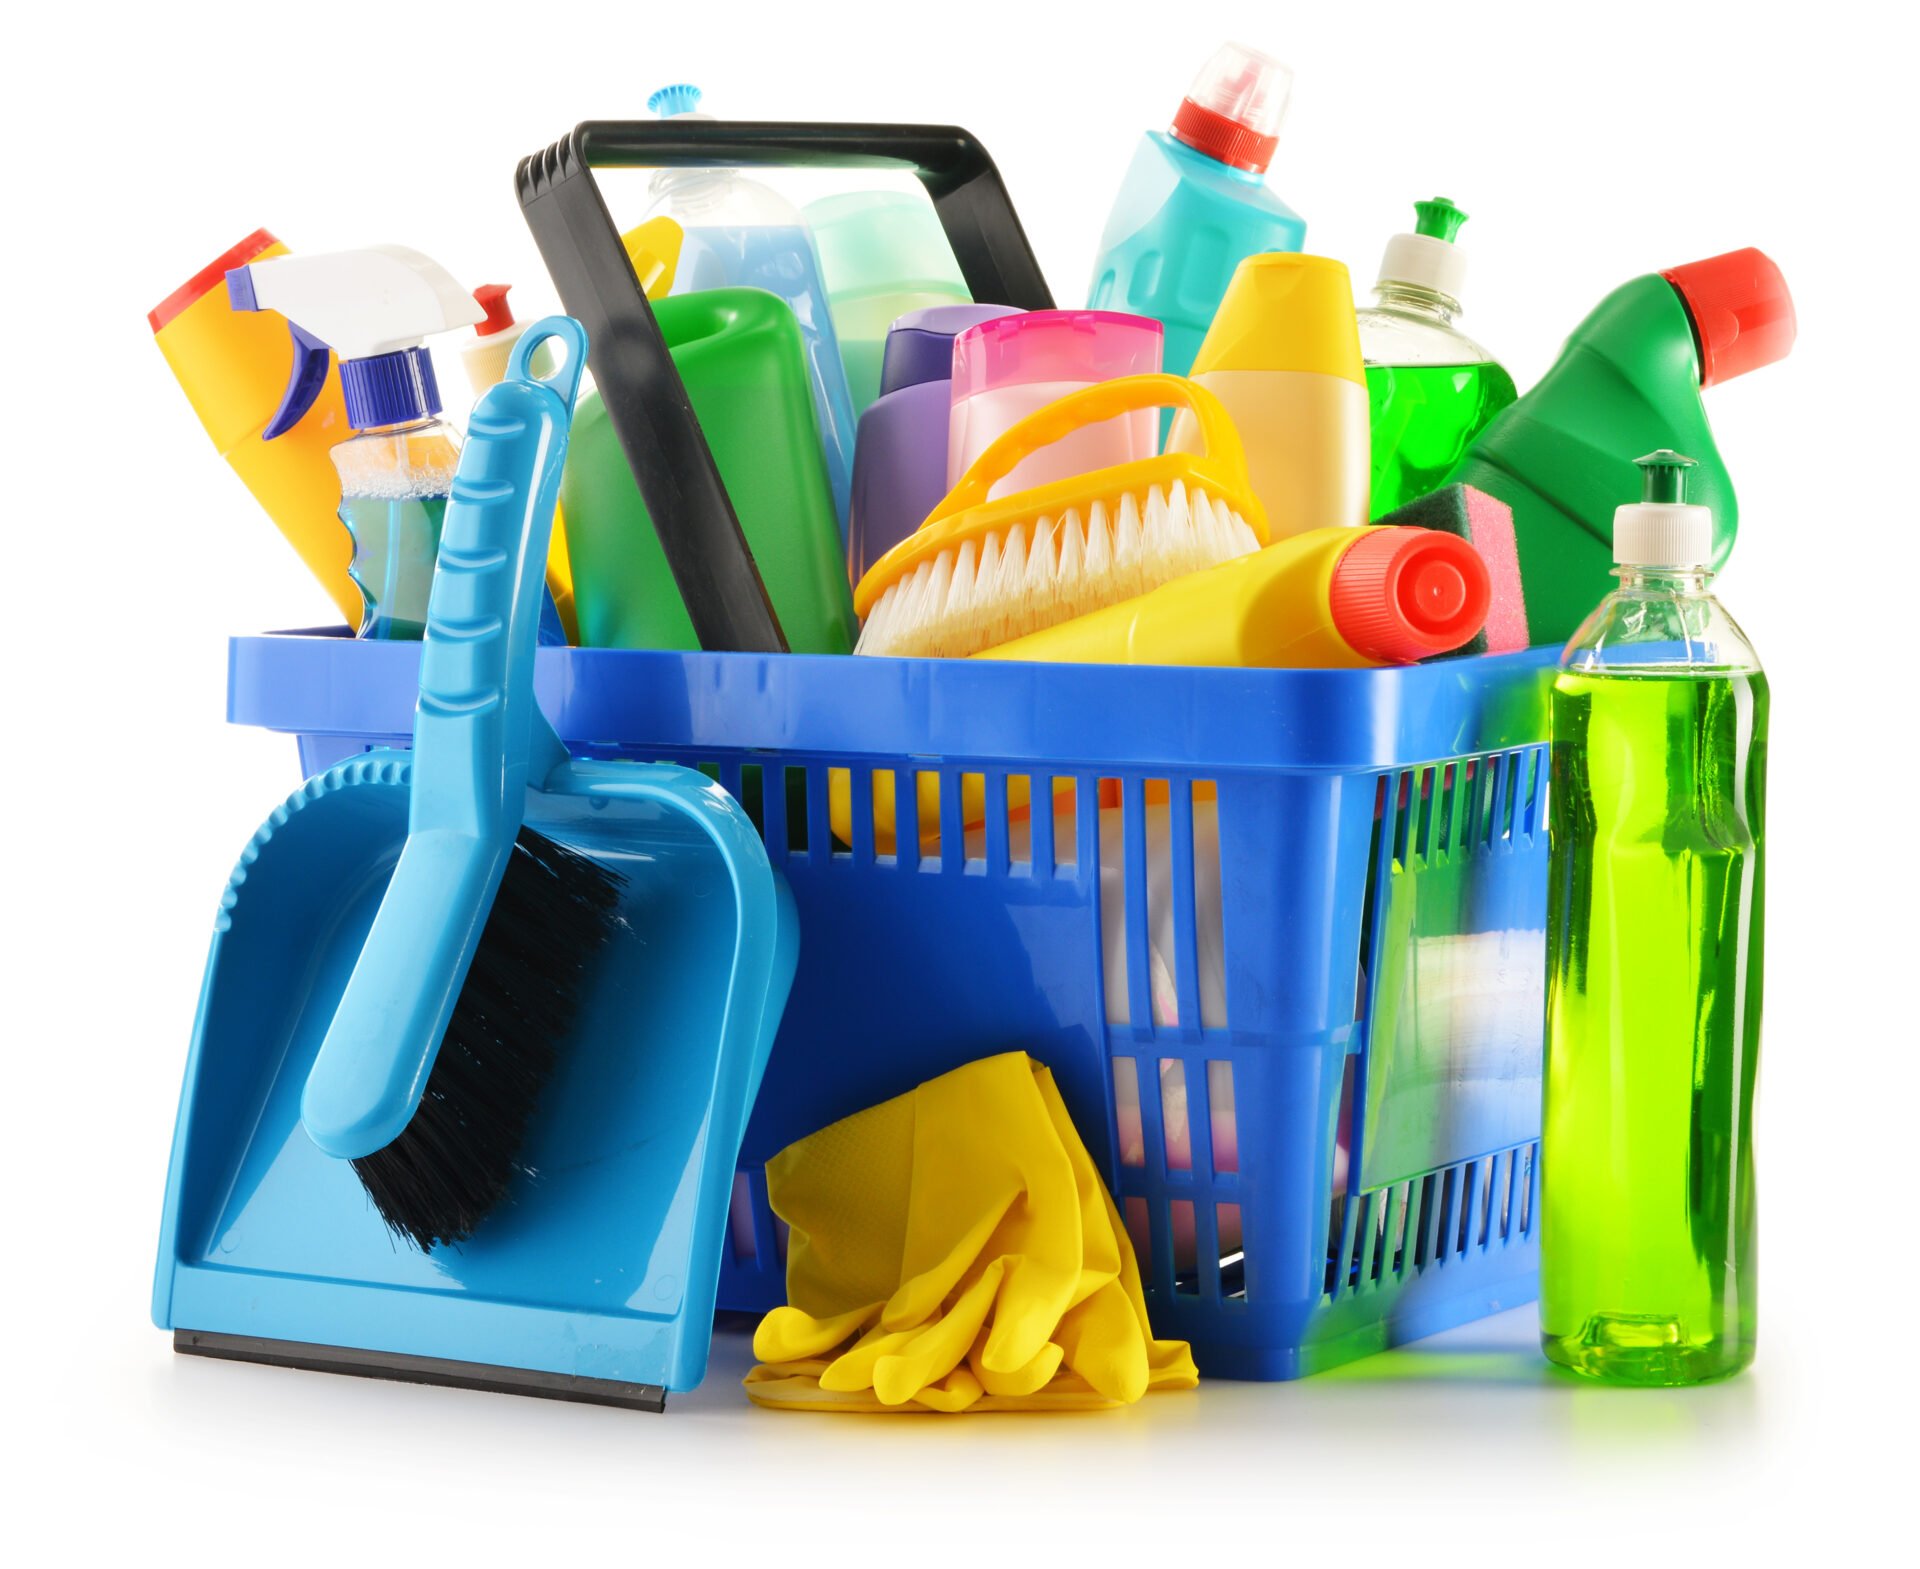 Shopping basket with detergent bottles and chemical cleaning supplies isolated on white